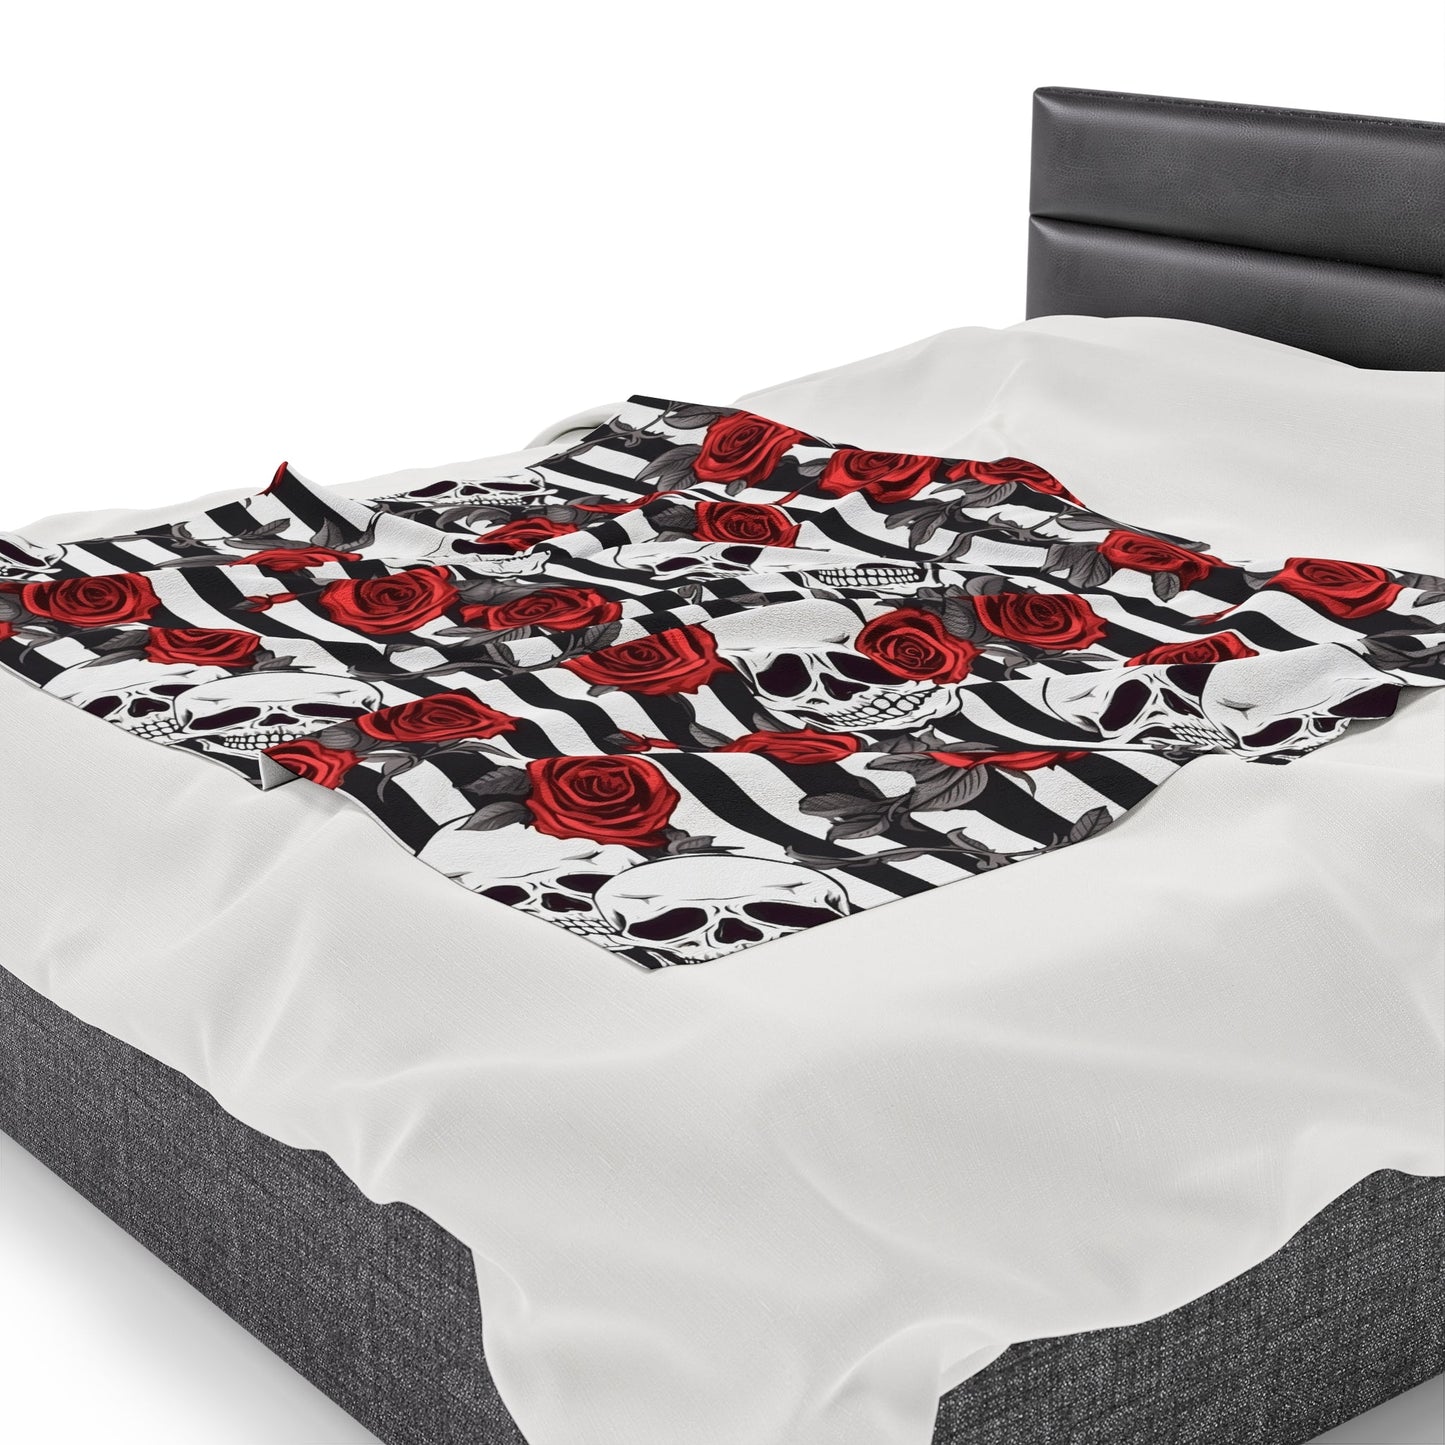 Skulls Red Roses and Stripes Throw BlanketAll Over PrintsVTZdesigns50" × 60"All Over PrintAOPBed